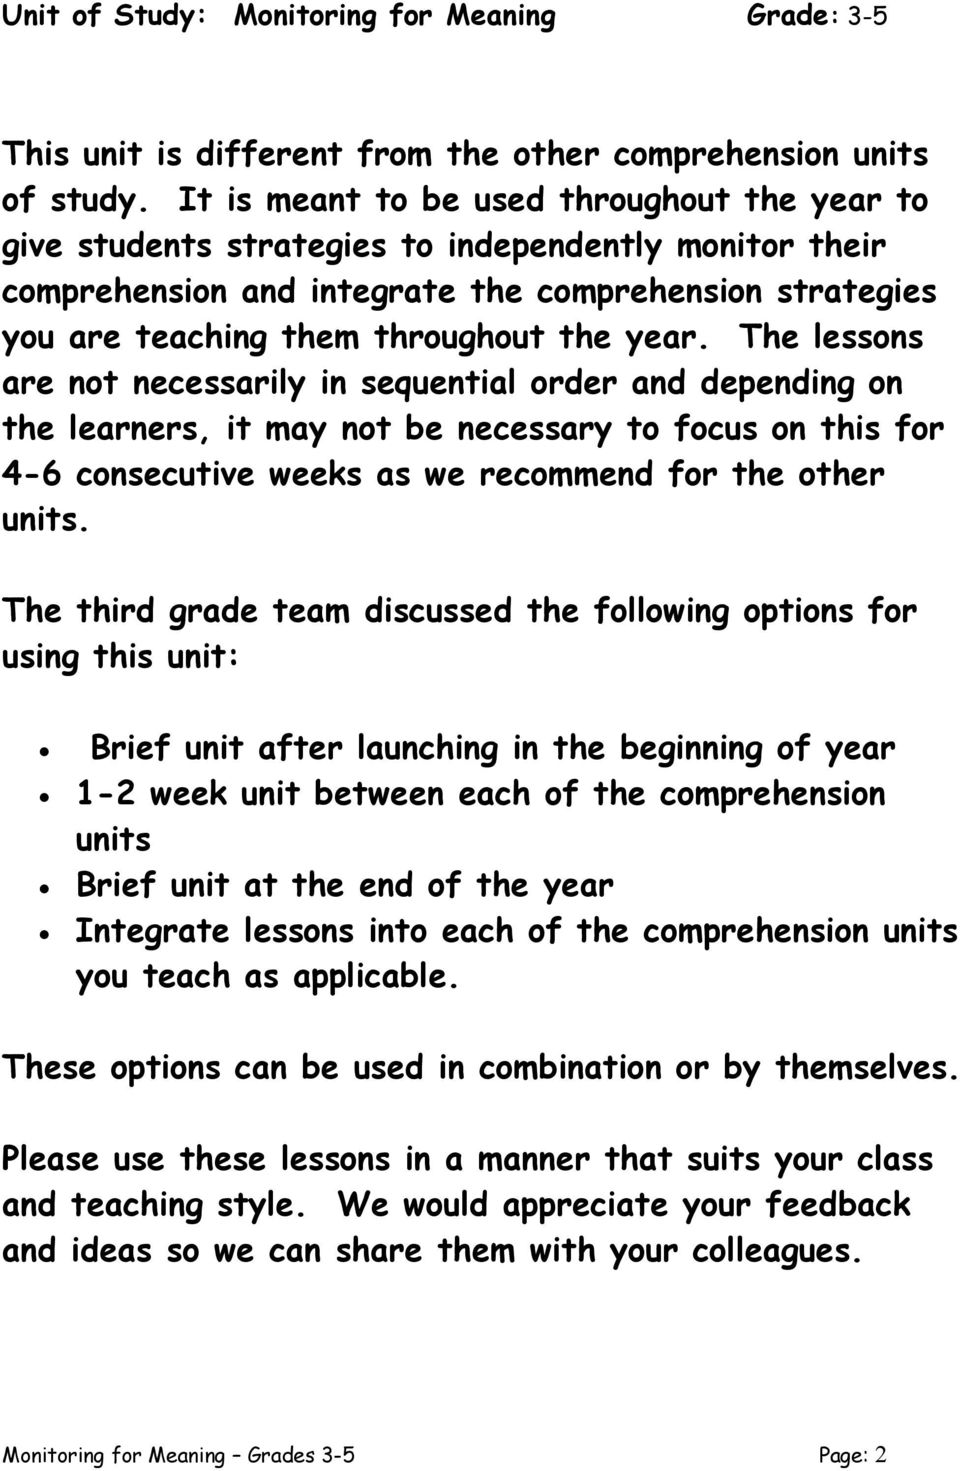 year. The lessons are not necessarily in sequential order and depending on the learners, it may not be necessary to focus on this for 4-6 consecutive weeks as we recommend for the other units.